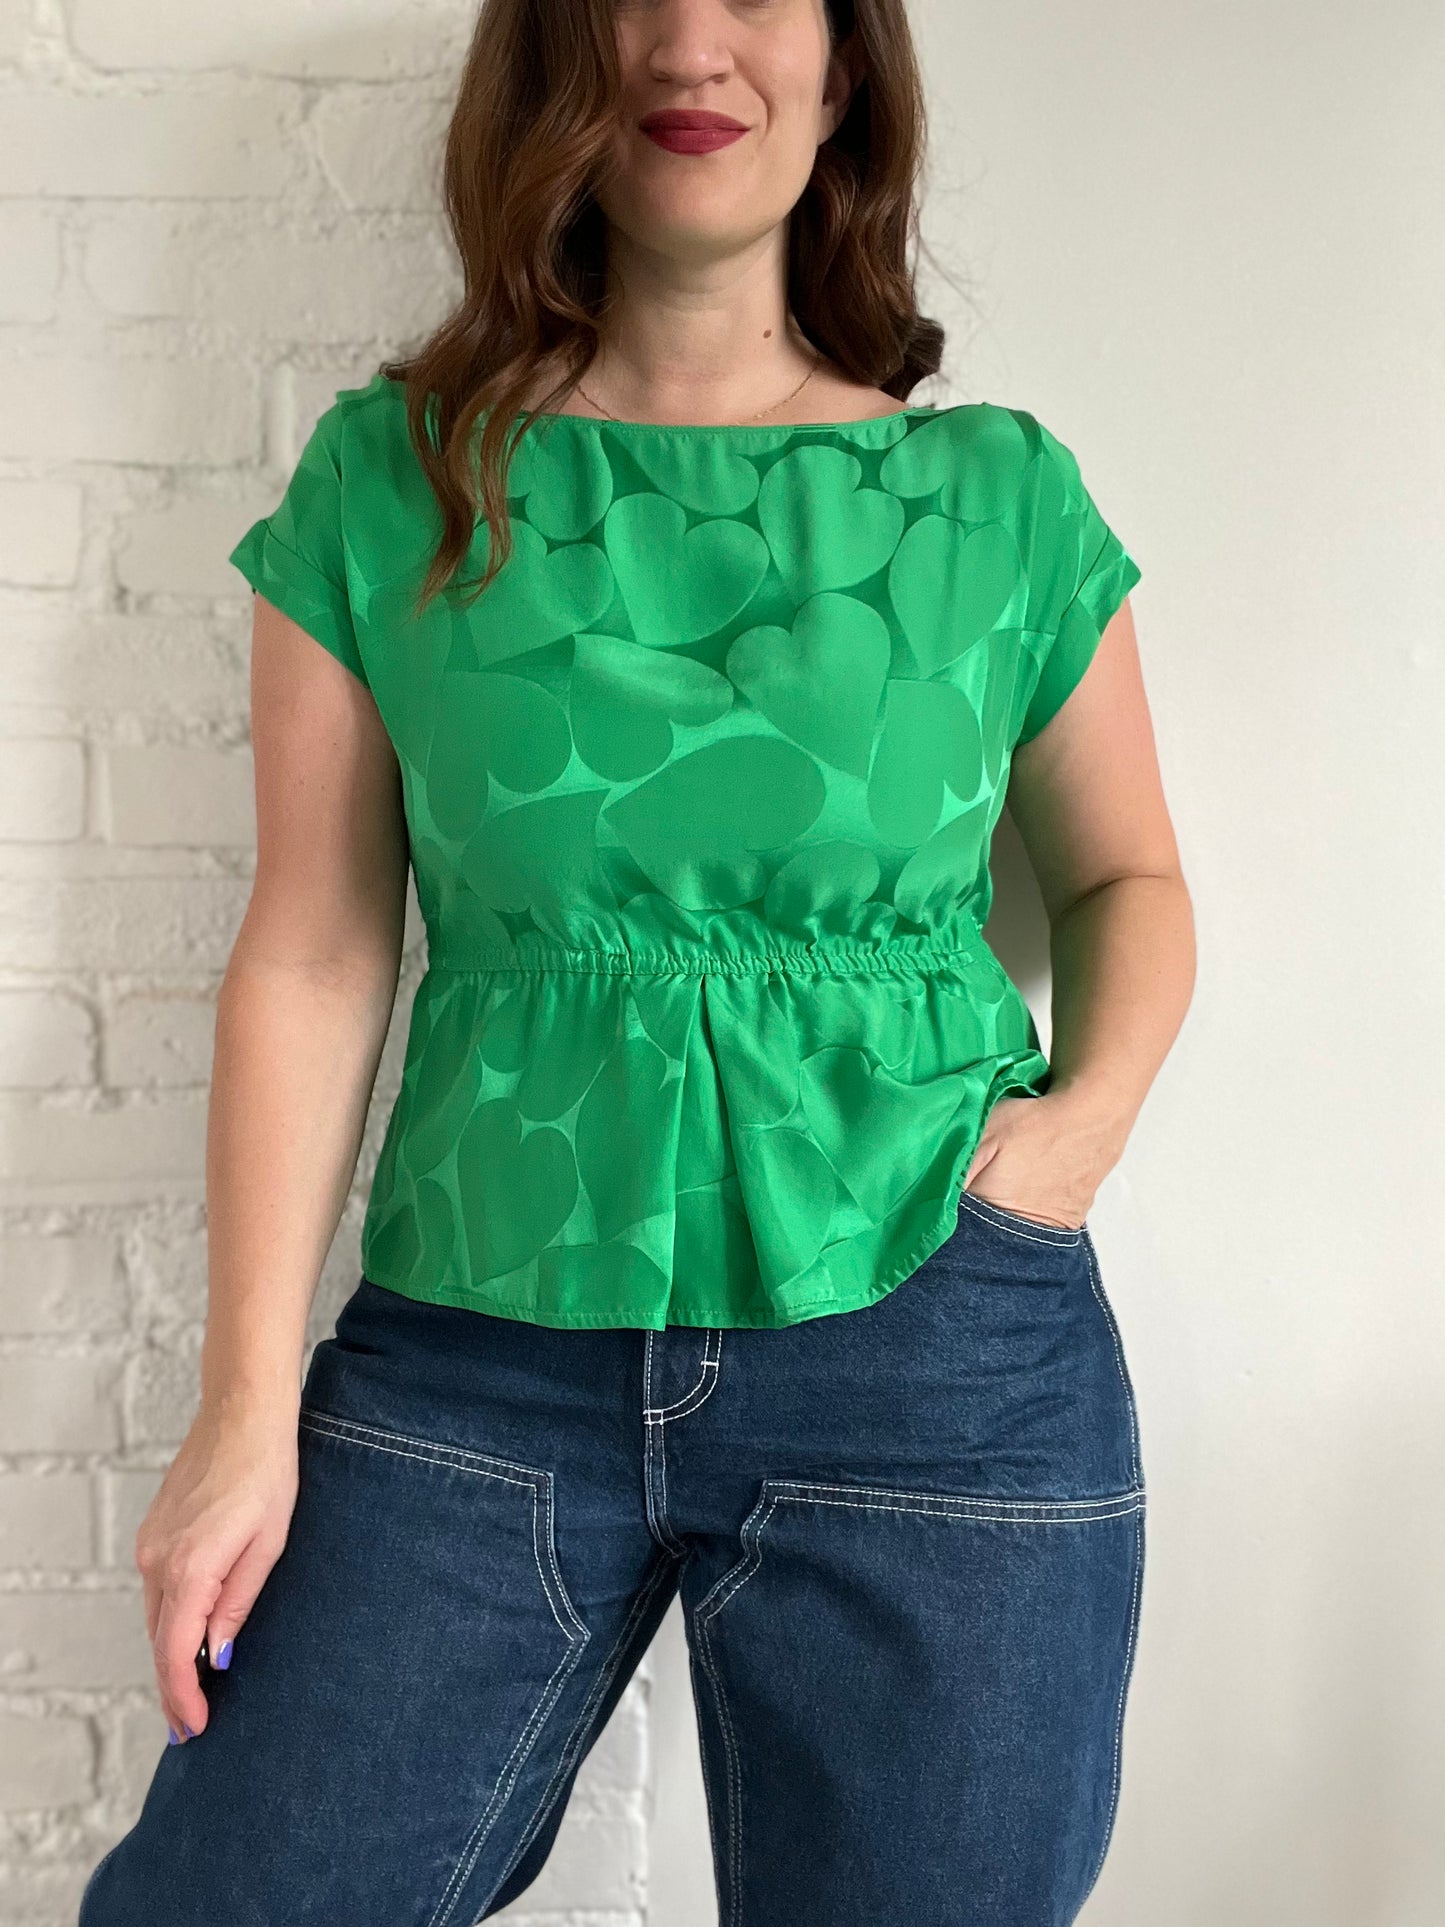 Marc Jacobs Heart Silk Top - Size S